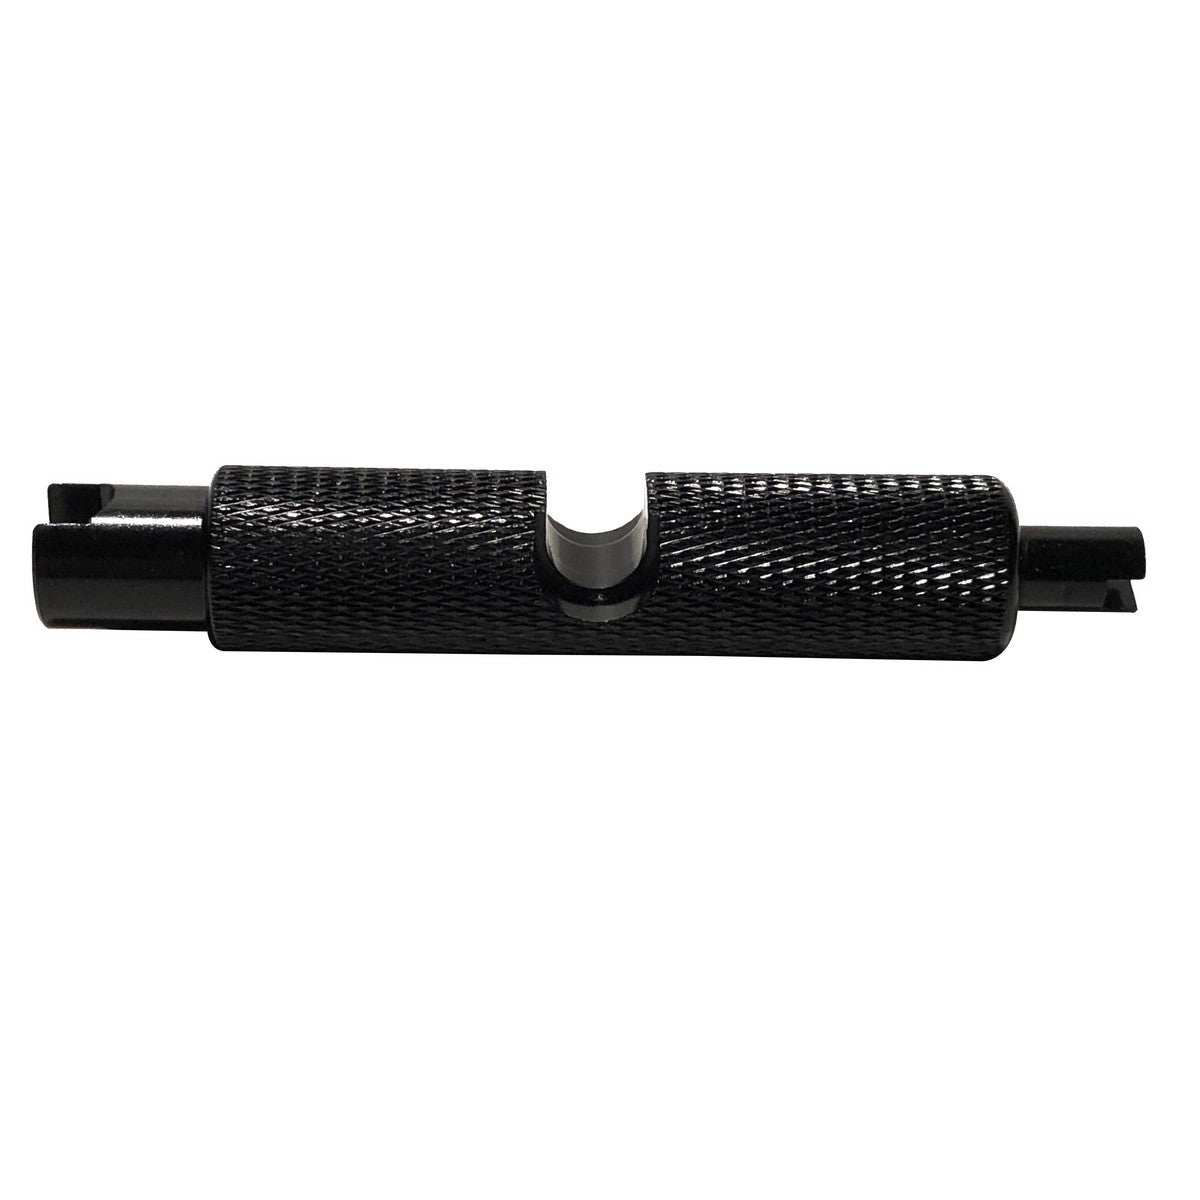 RNX Multi-Use Valve Core Removal Tool for Presta Valves and Schrader Bicycle Valves